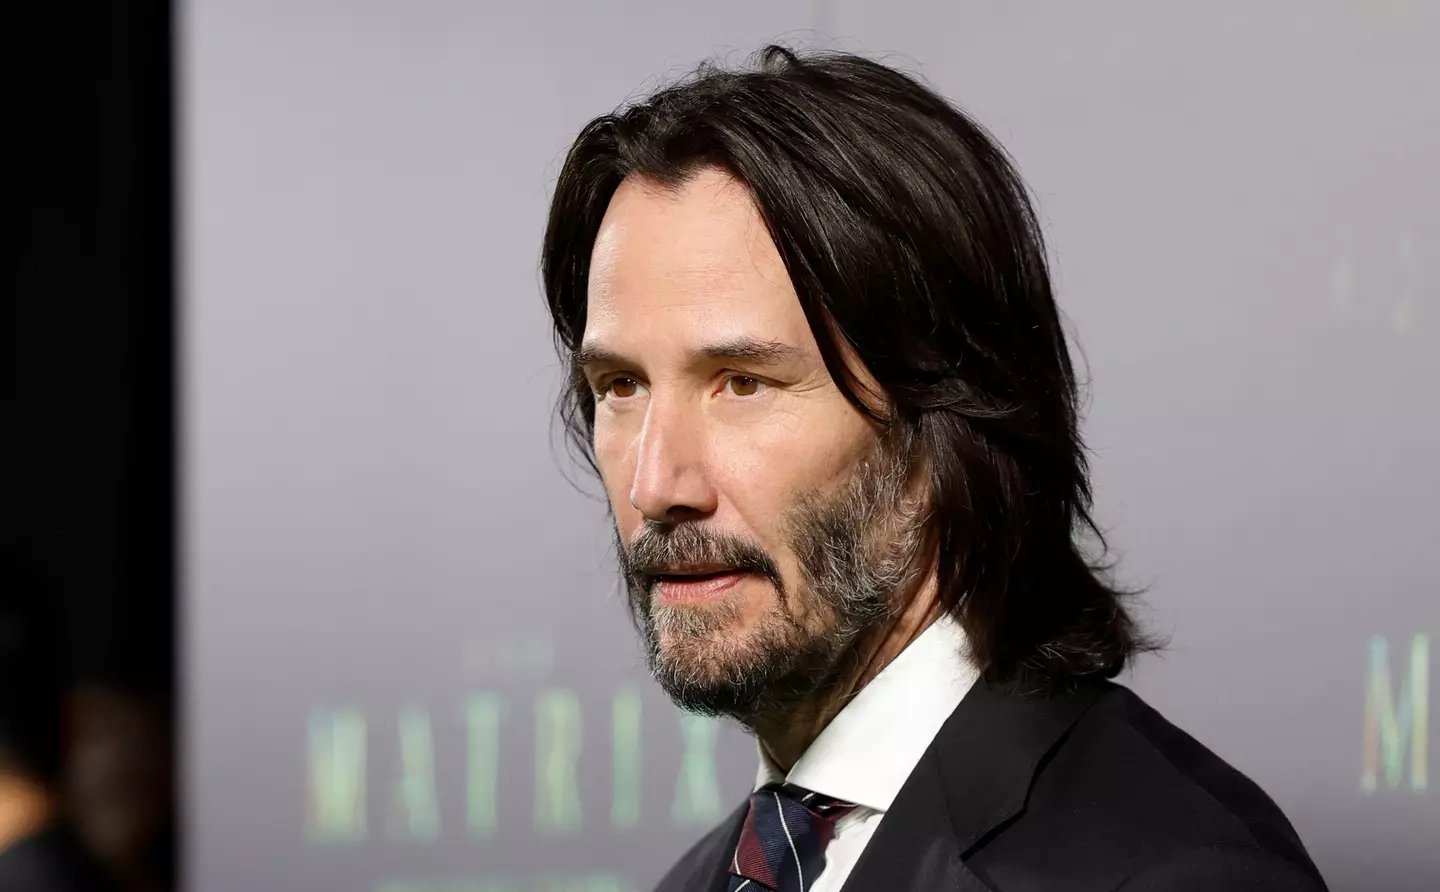 Keanu Reeves has been known to love a bit of English pub grub.